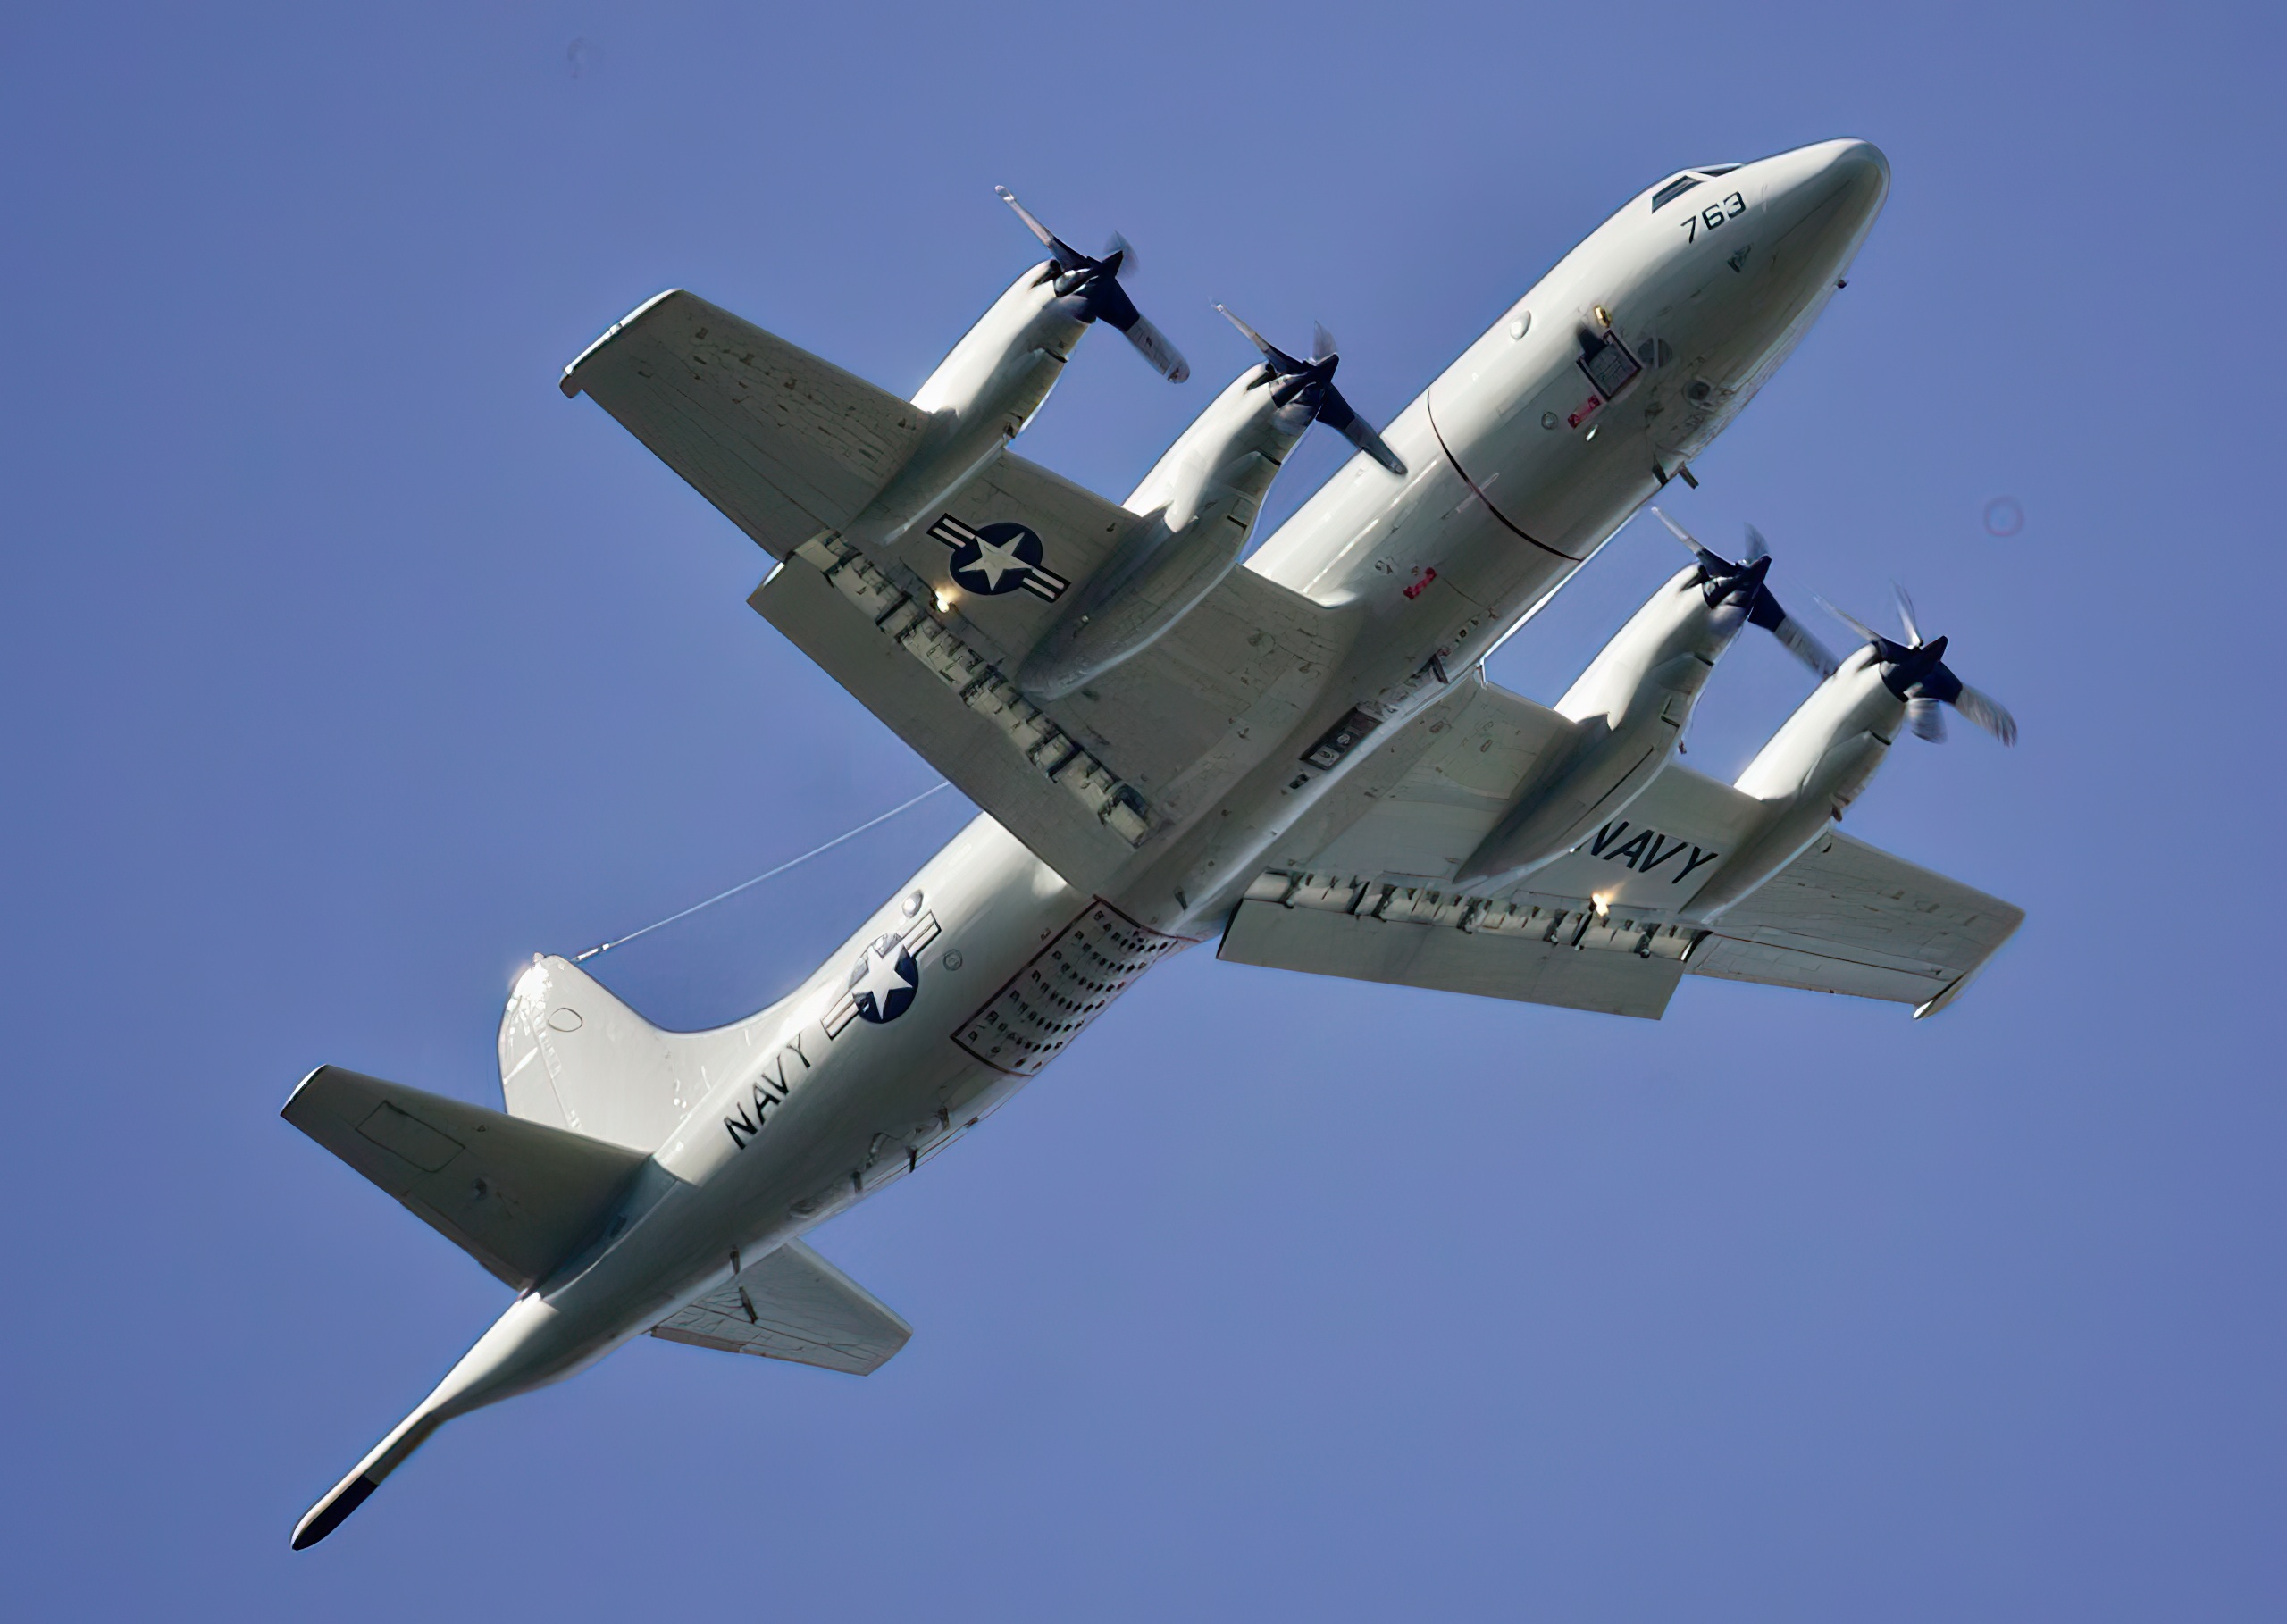 An underside view of a P-3C "Orion" submarine-hunter airplane in flight